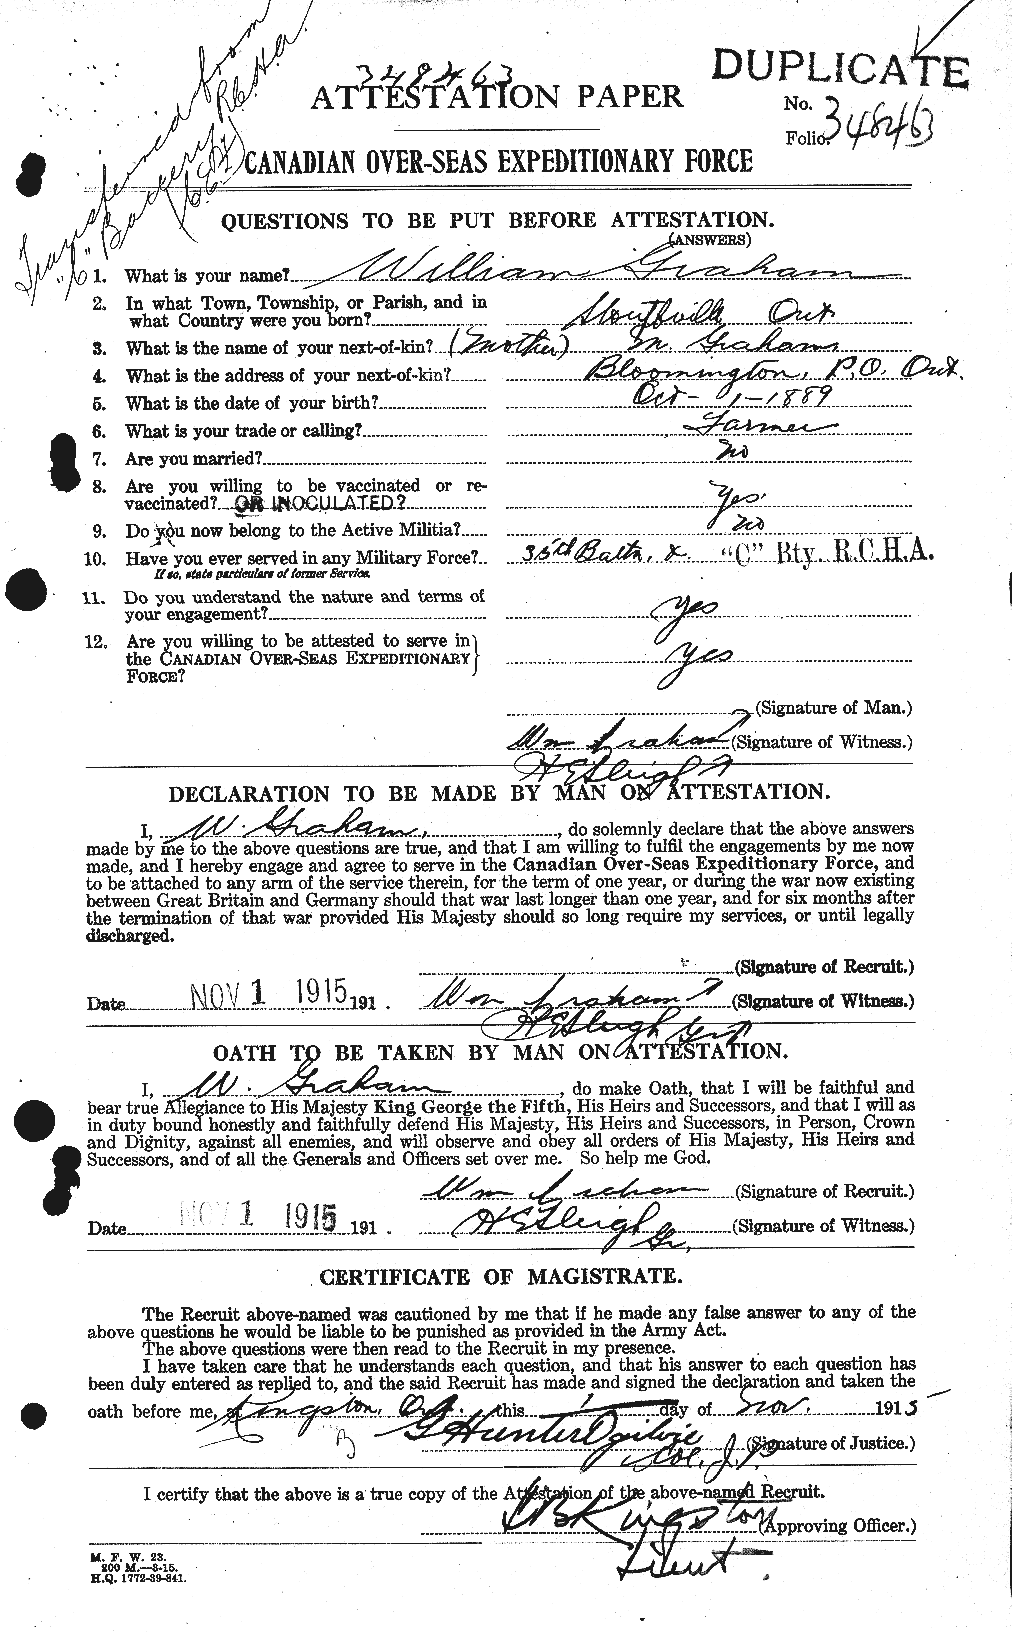 Personnel Records of the First World War - CEF 362697a